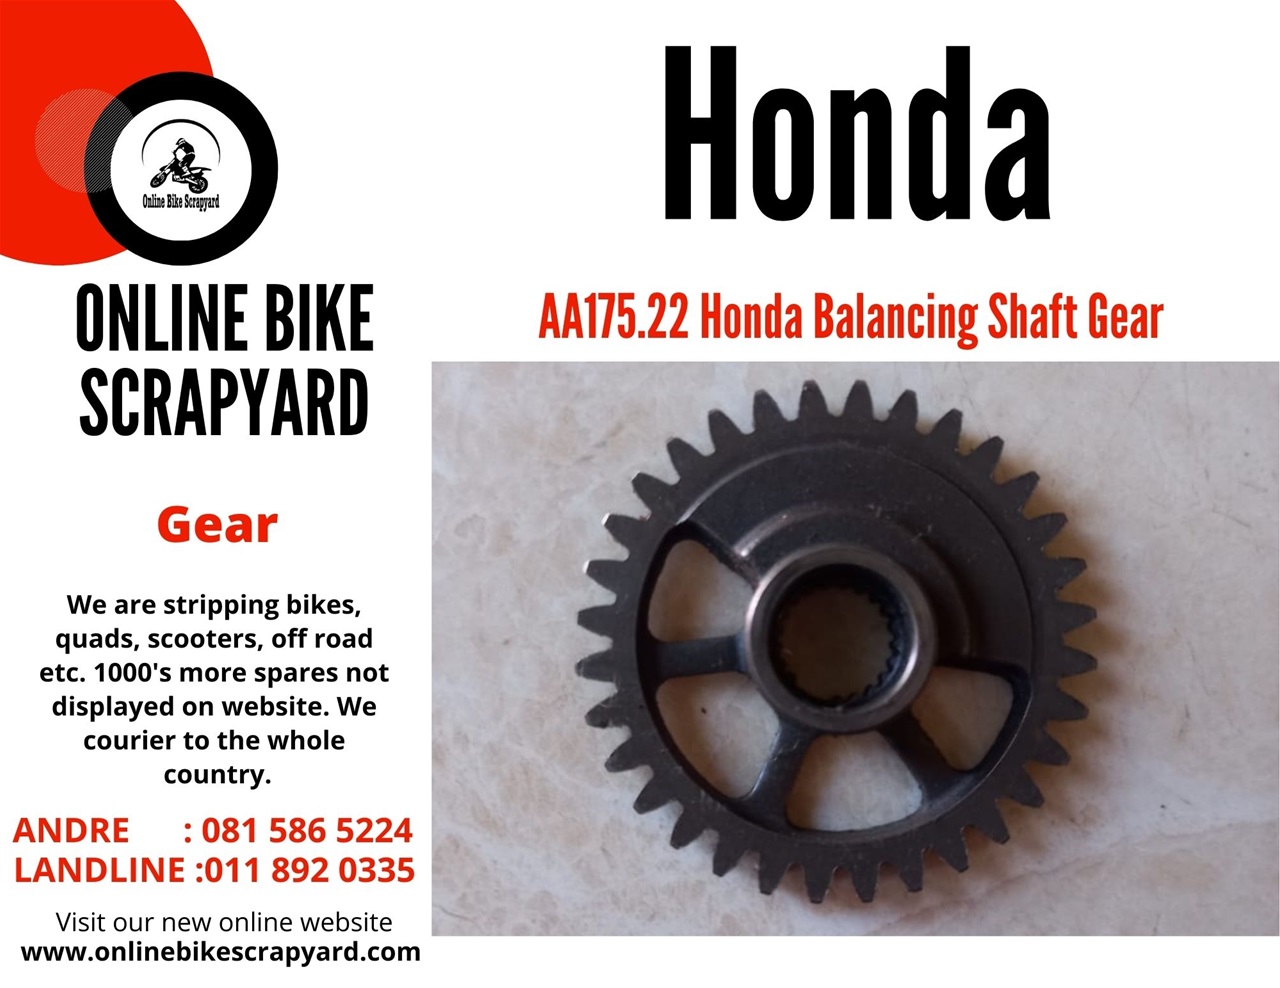 Balancing shaft. Online bike Scrapyard new and secondhand spares and accessories